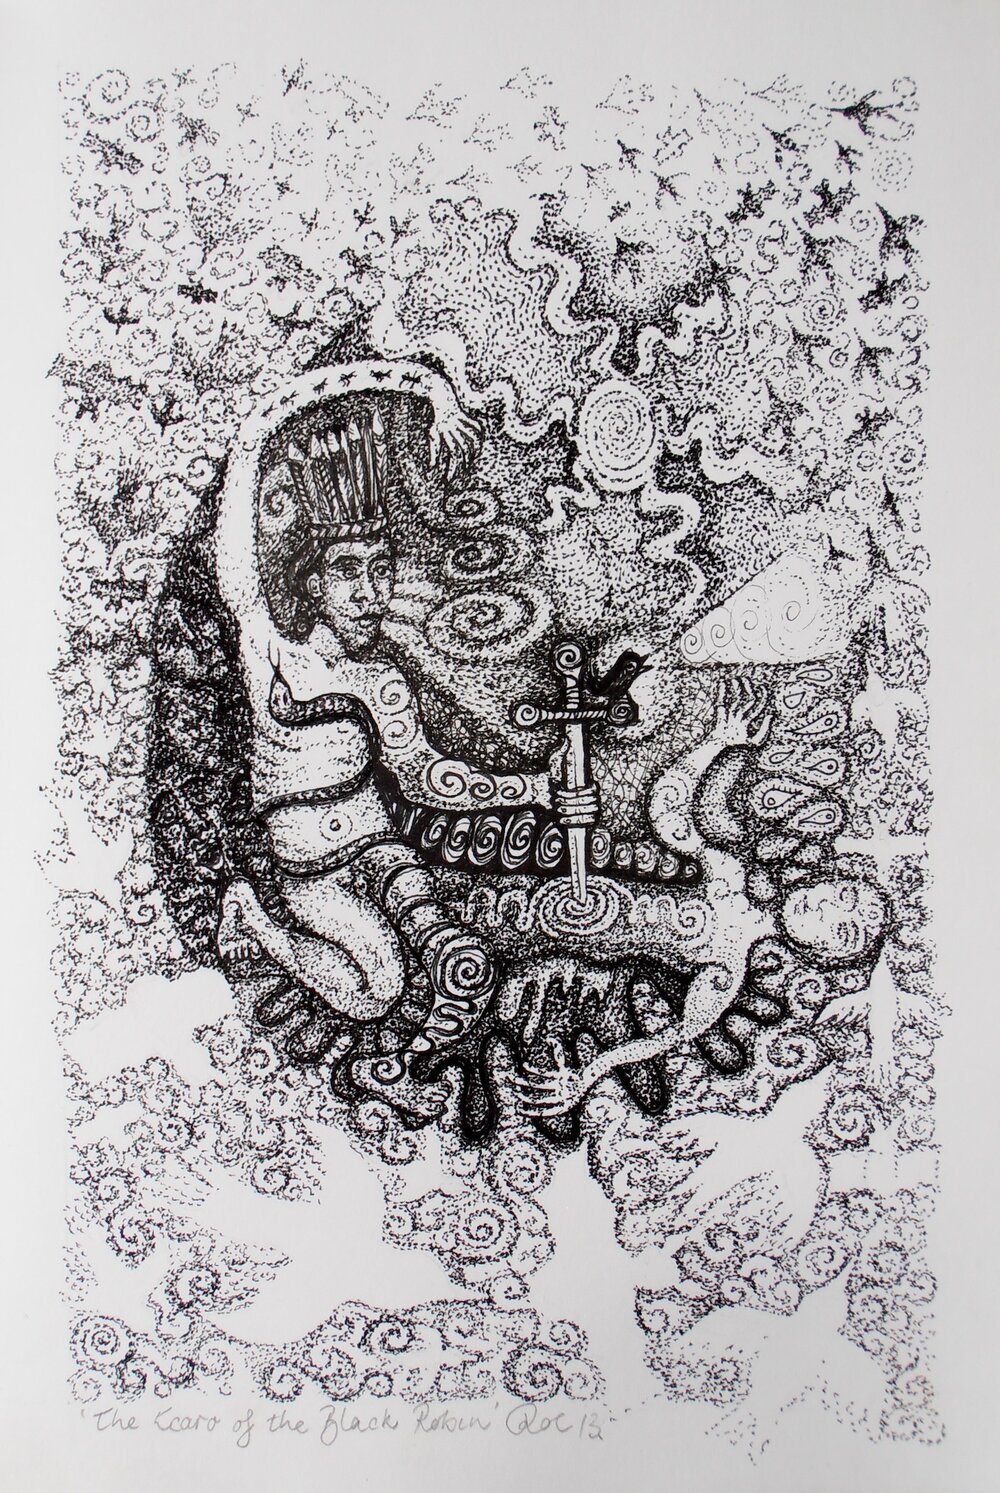  “The Icaro of the Black Robin”  Pen and ink, 21cm x 29.7 cm on cartridge, 2013. 